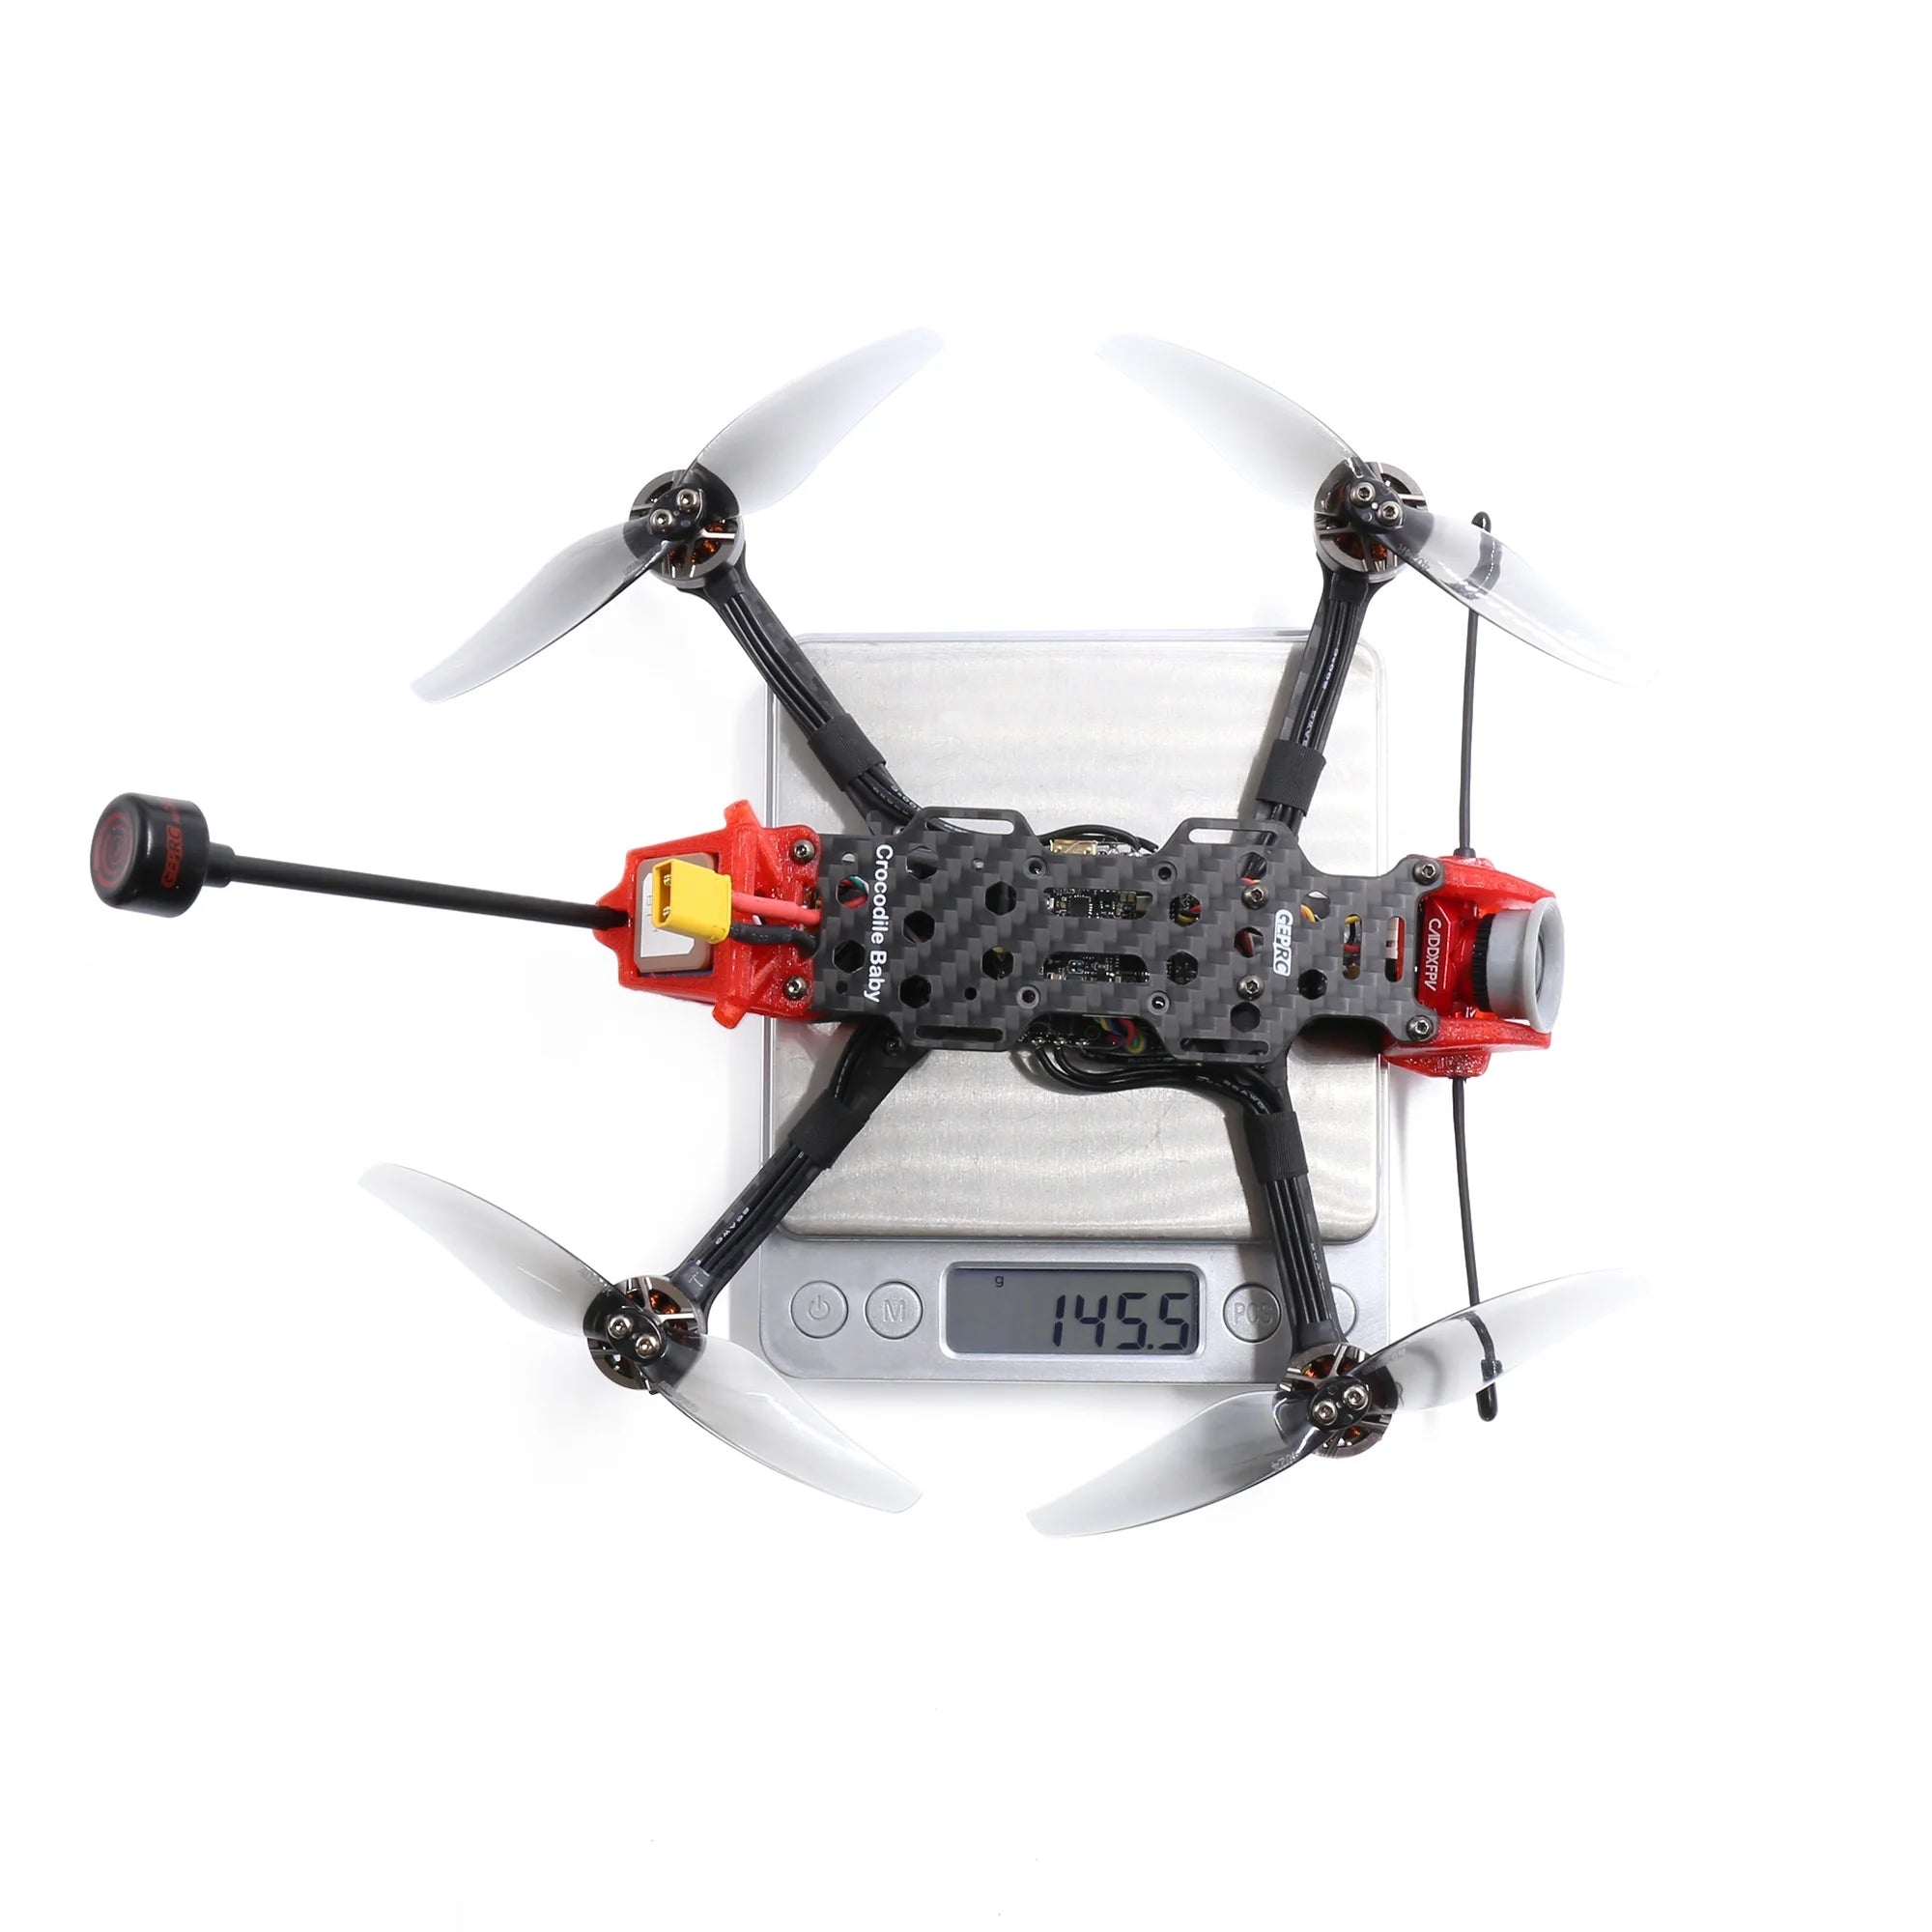 GEPRC Crocodile Baby 4 FPV Drone, Crocodile Baby 4 inch independently designed GPS module, added GPS function . when signal